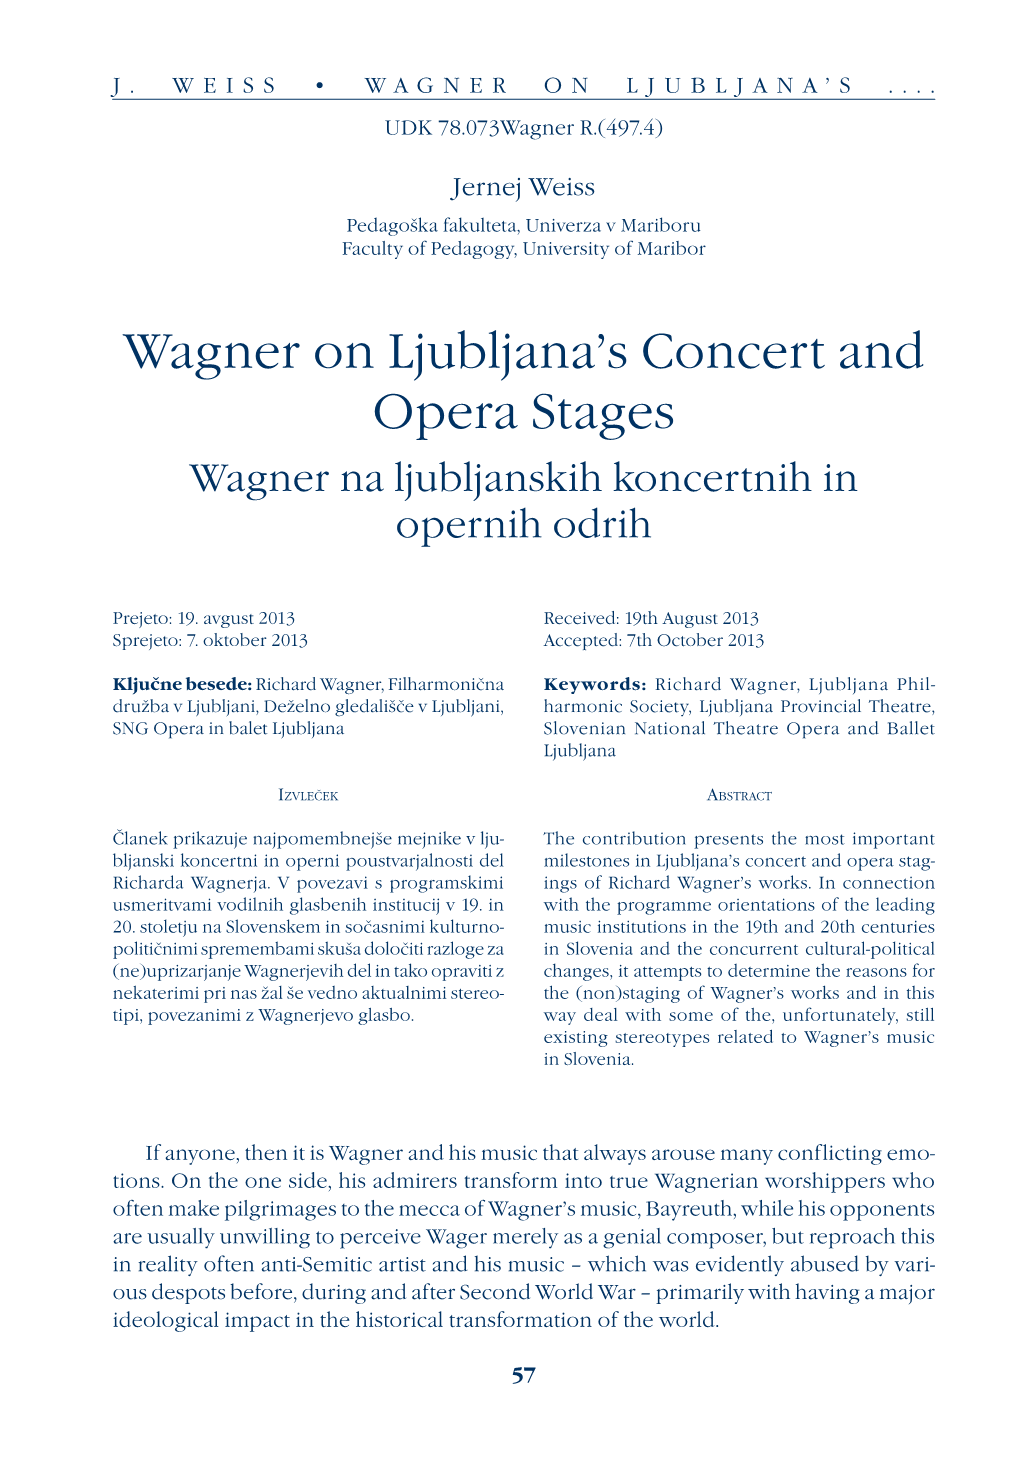 Wagner on Ljubljana's Concert and Opera Stages